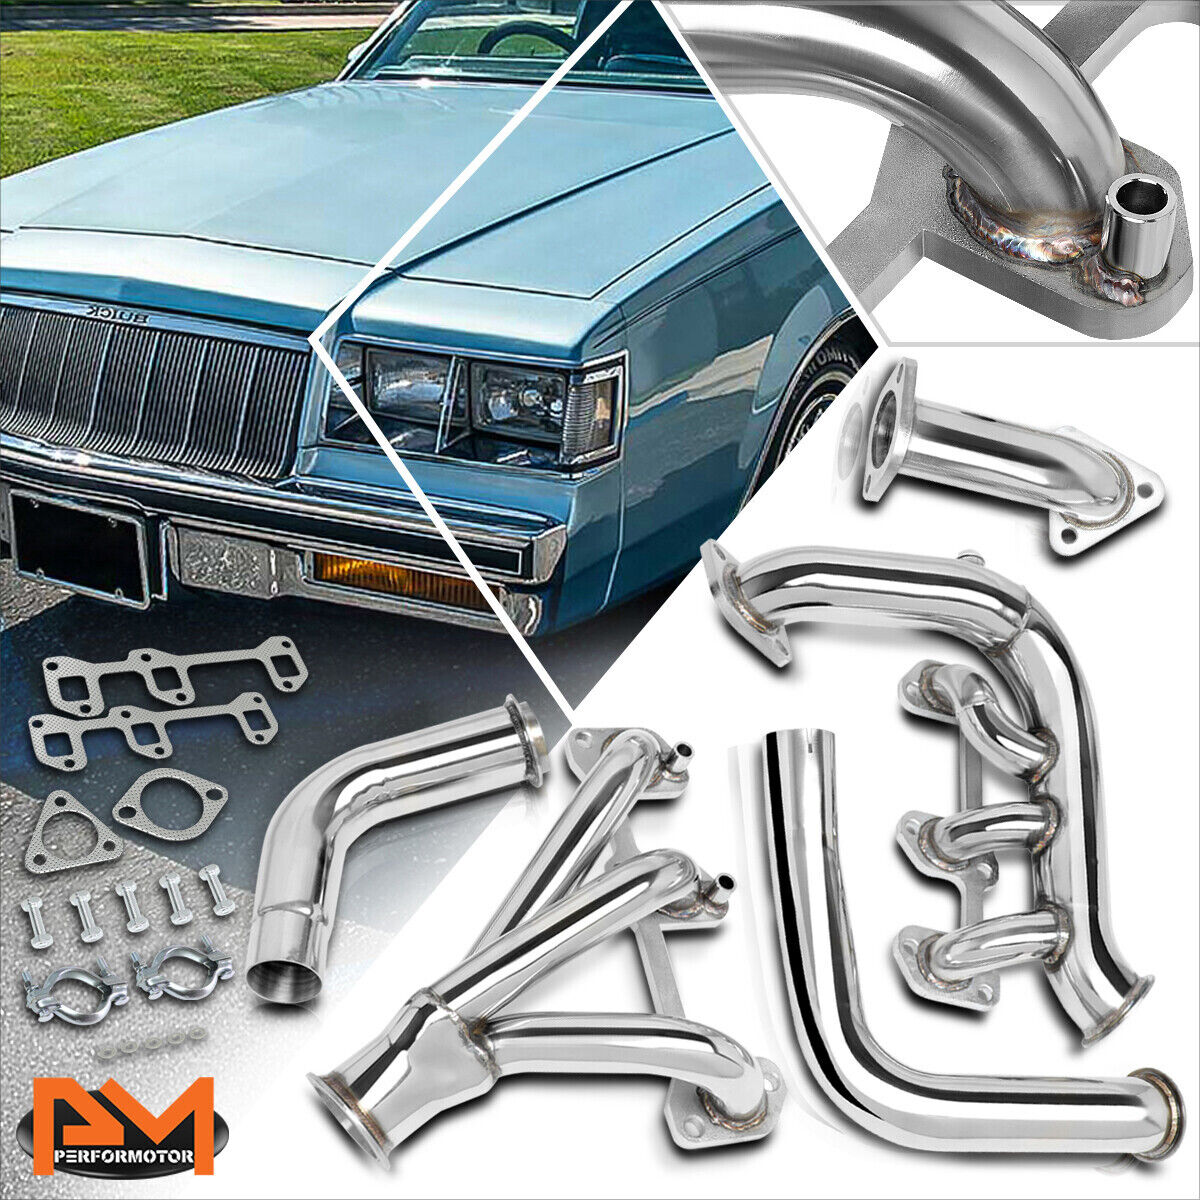 For 84-85 Buick Regal 3.8 V6 Turbo Stainless Steel Tri-Y Exhaust Header Manifold